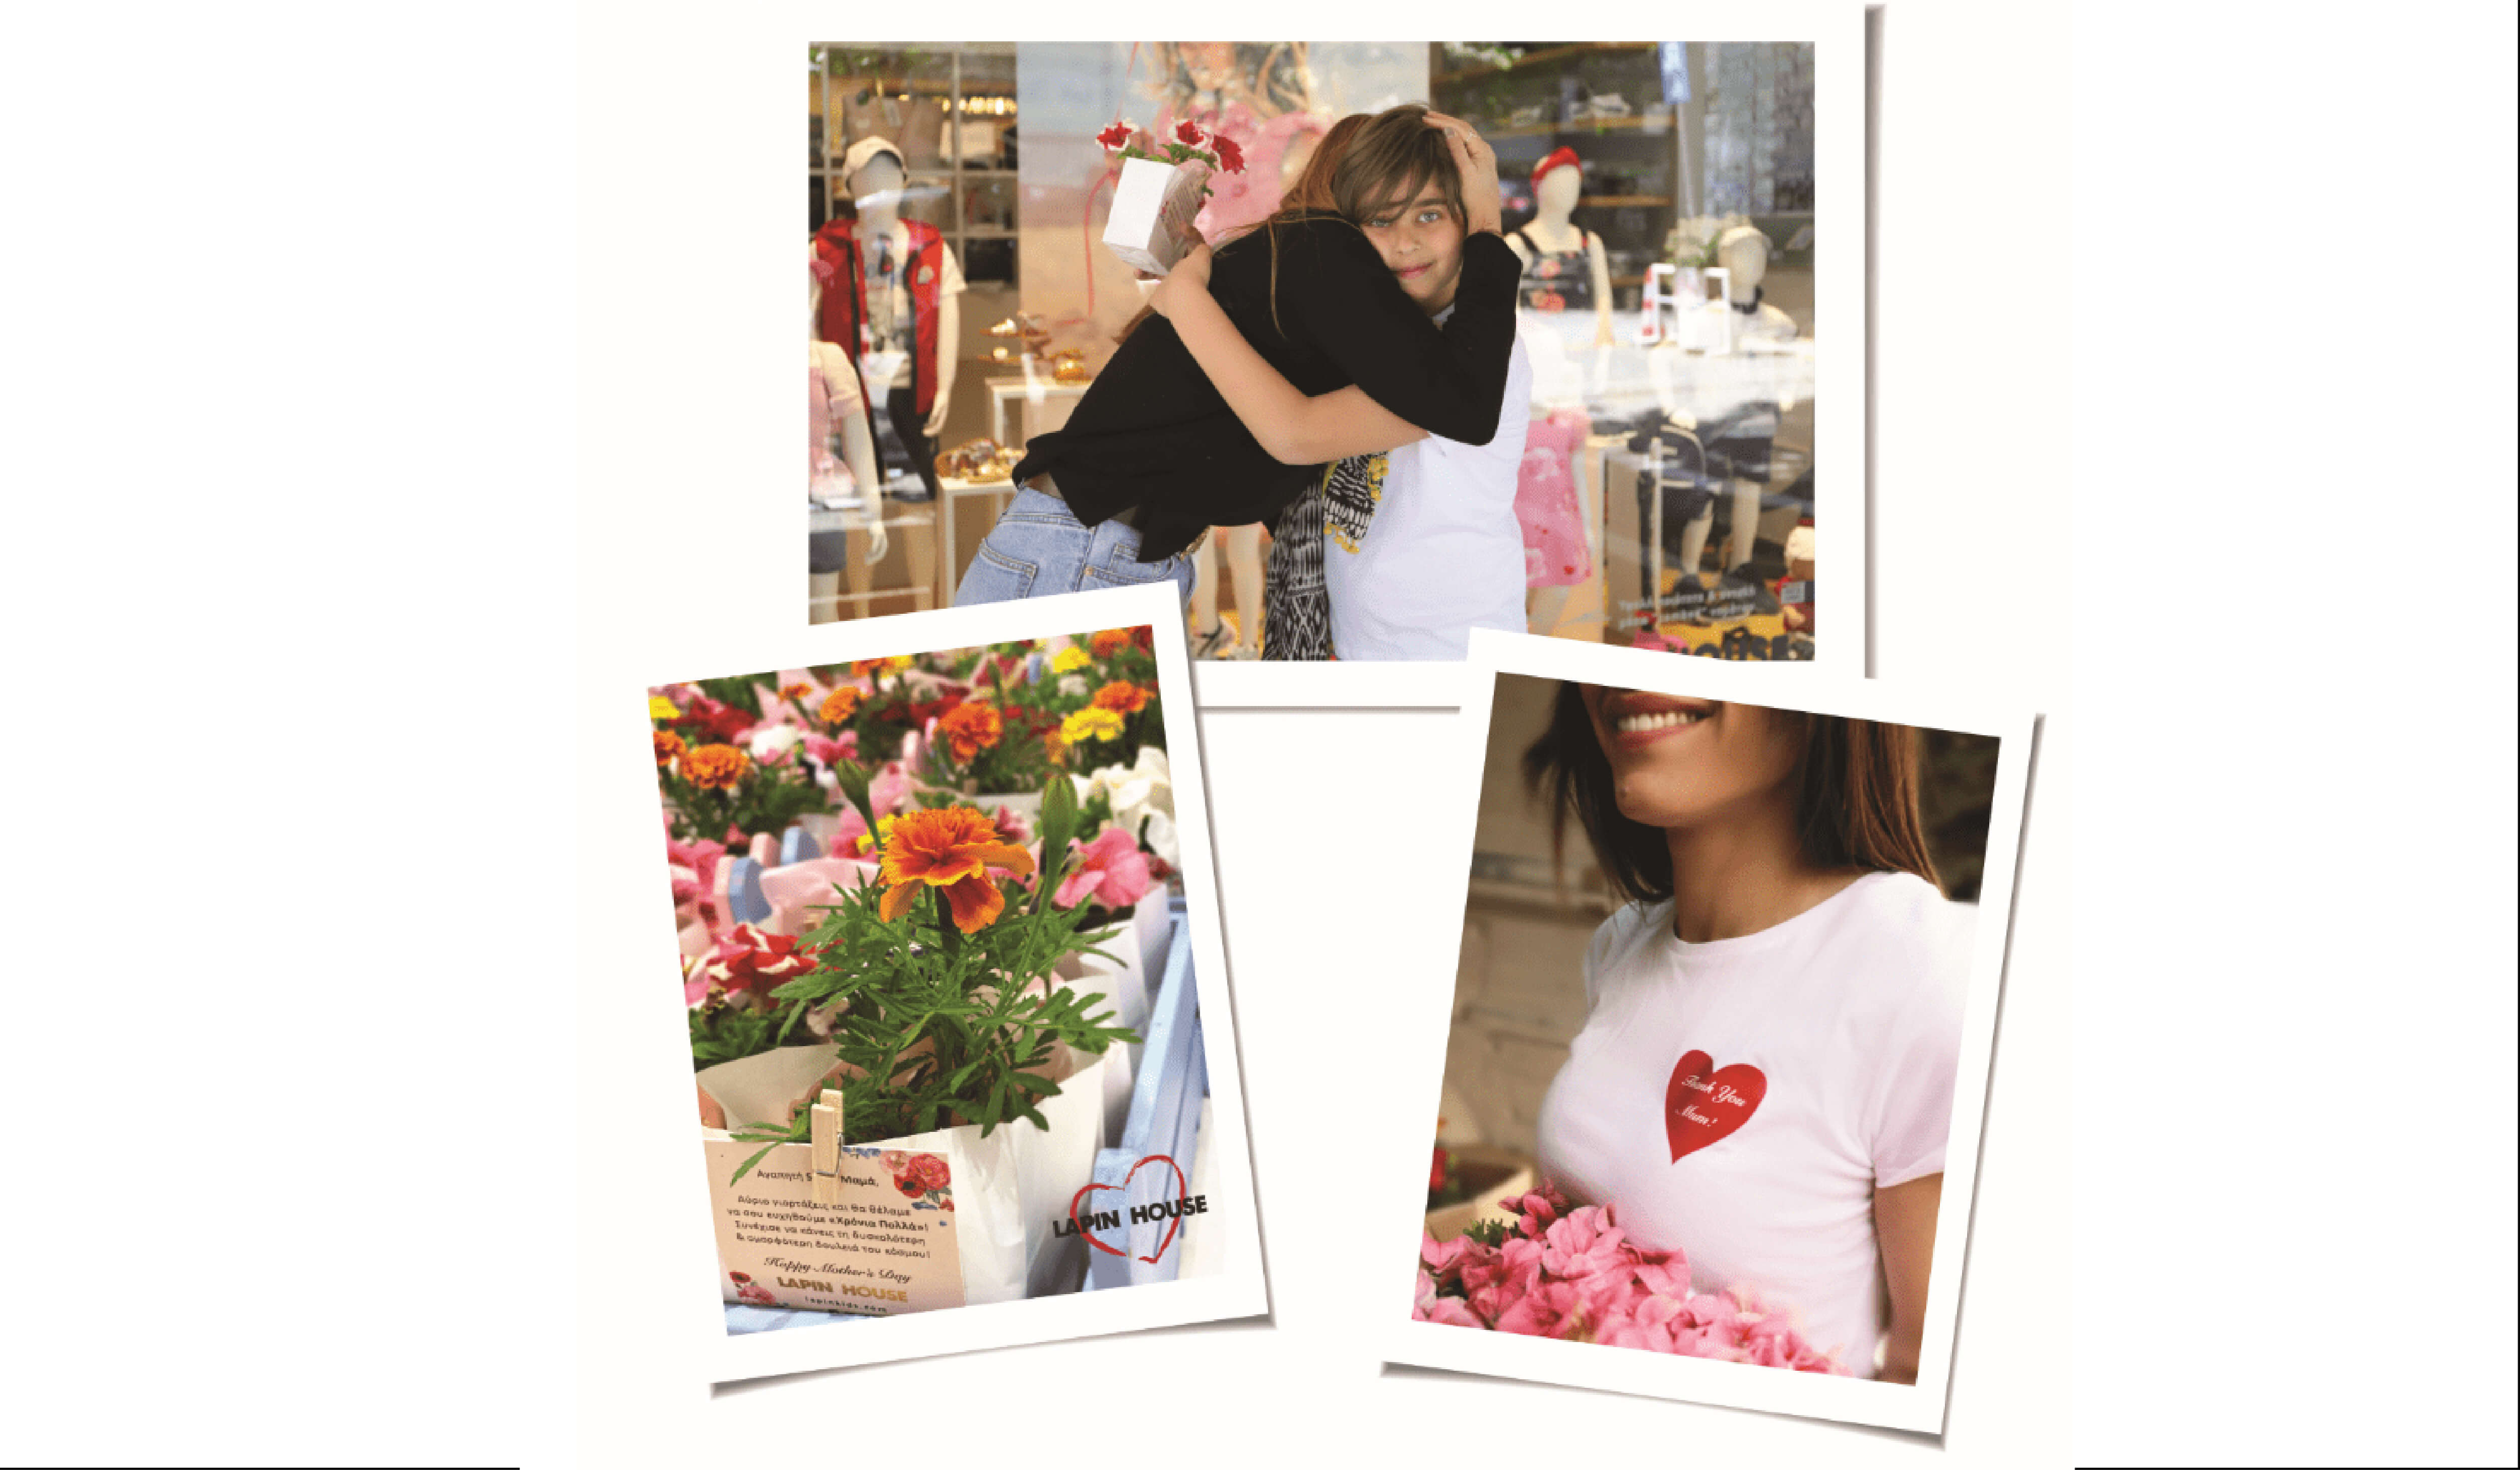 Lapin House stores share their love with all moms♥!